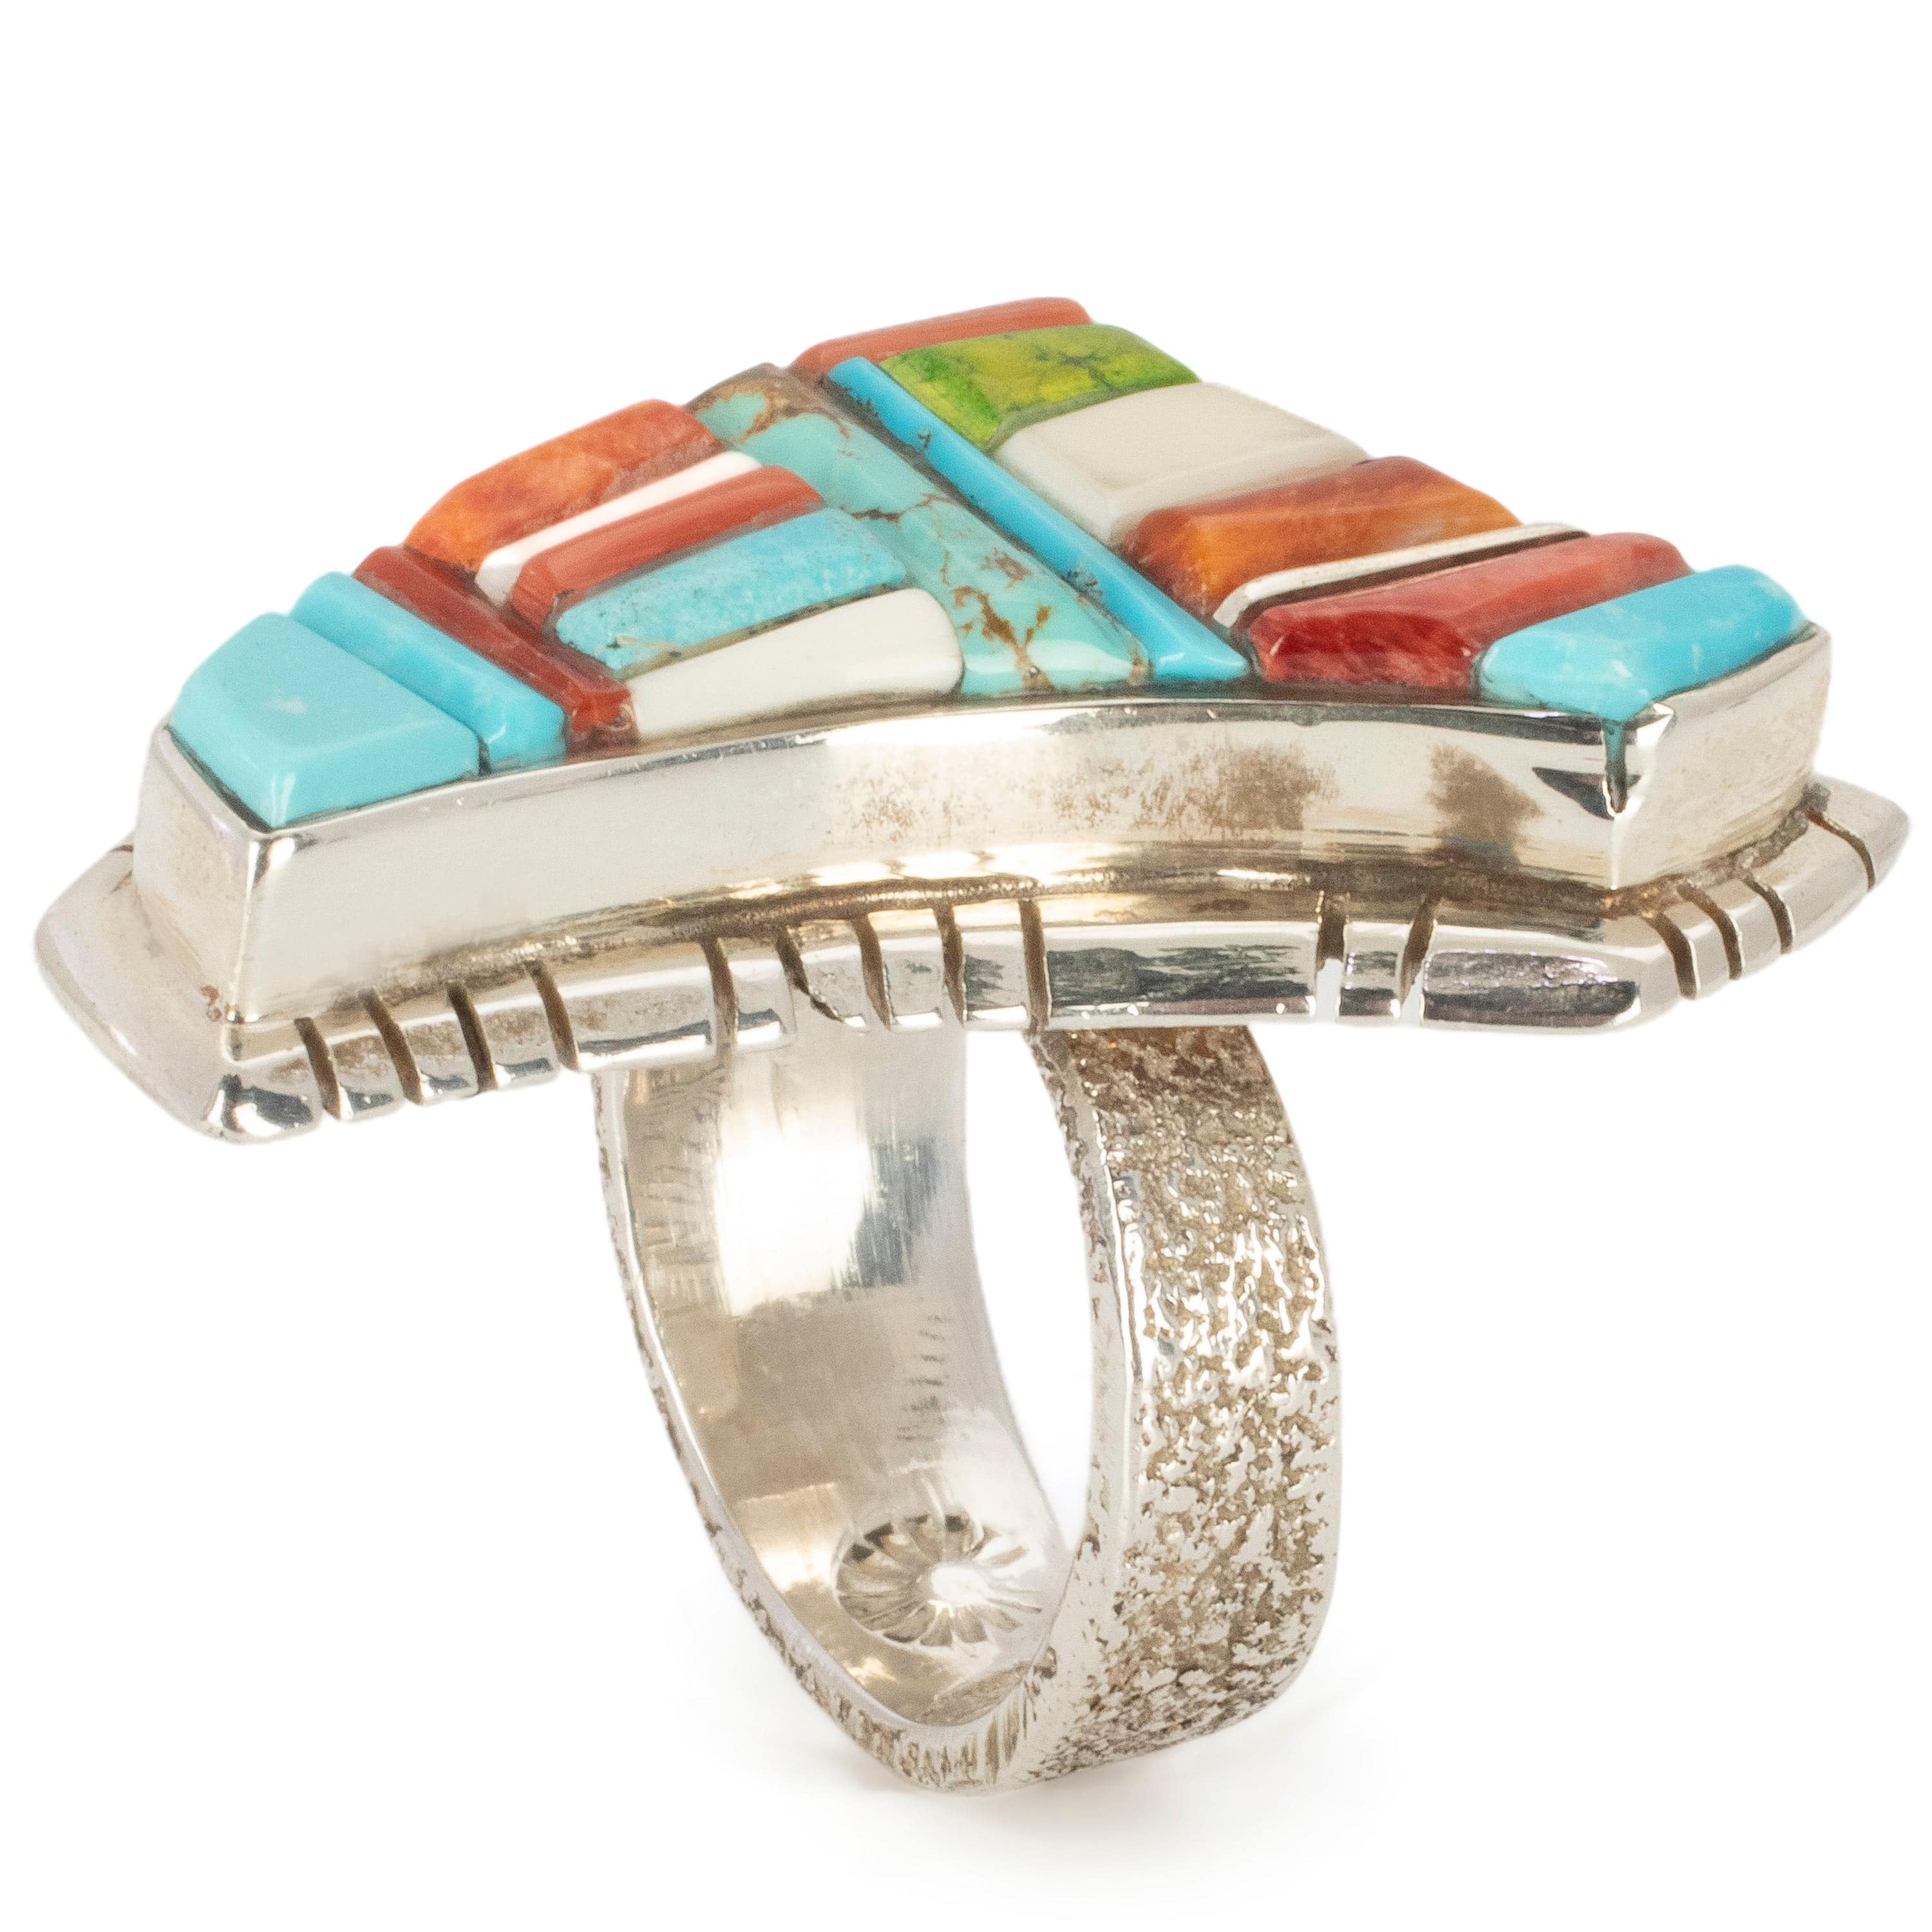 Kalifano Native American Jewelry 9 David Tune Navajo Sleeping Beauty Turquoise, Coral, Spiny Oyster Shell, and Gaspite USA Native American Made 925 Sterling Silver Ring NAR1800.017.9